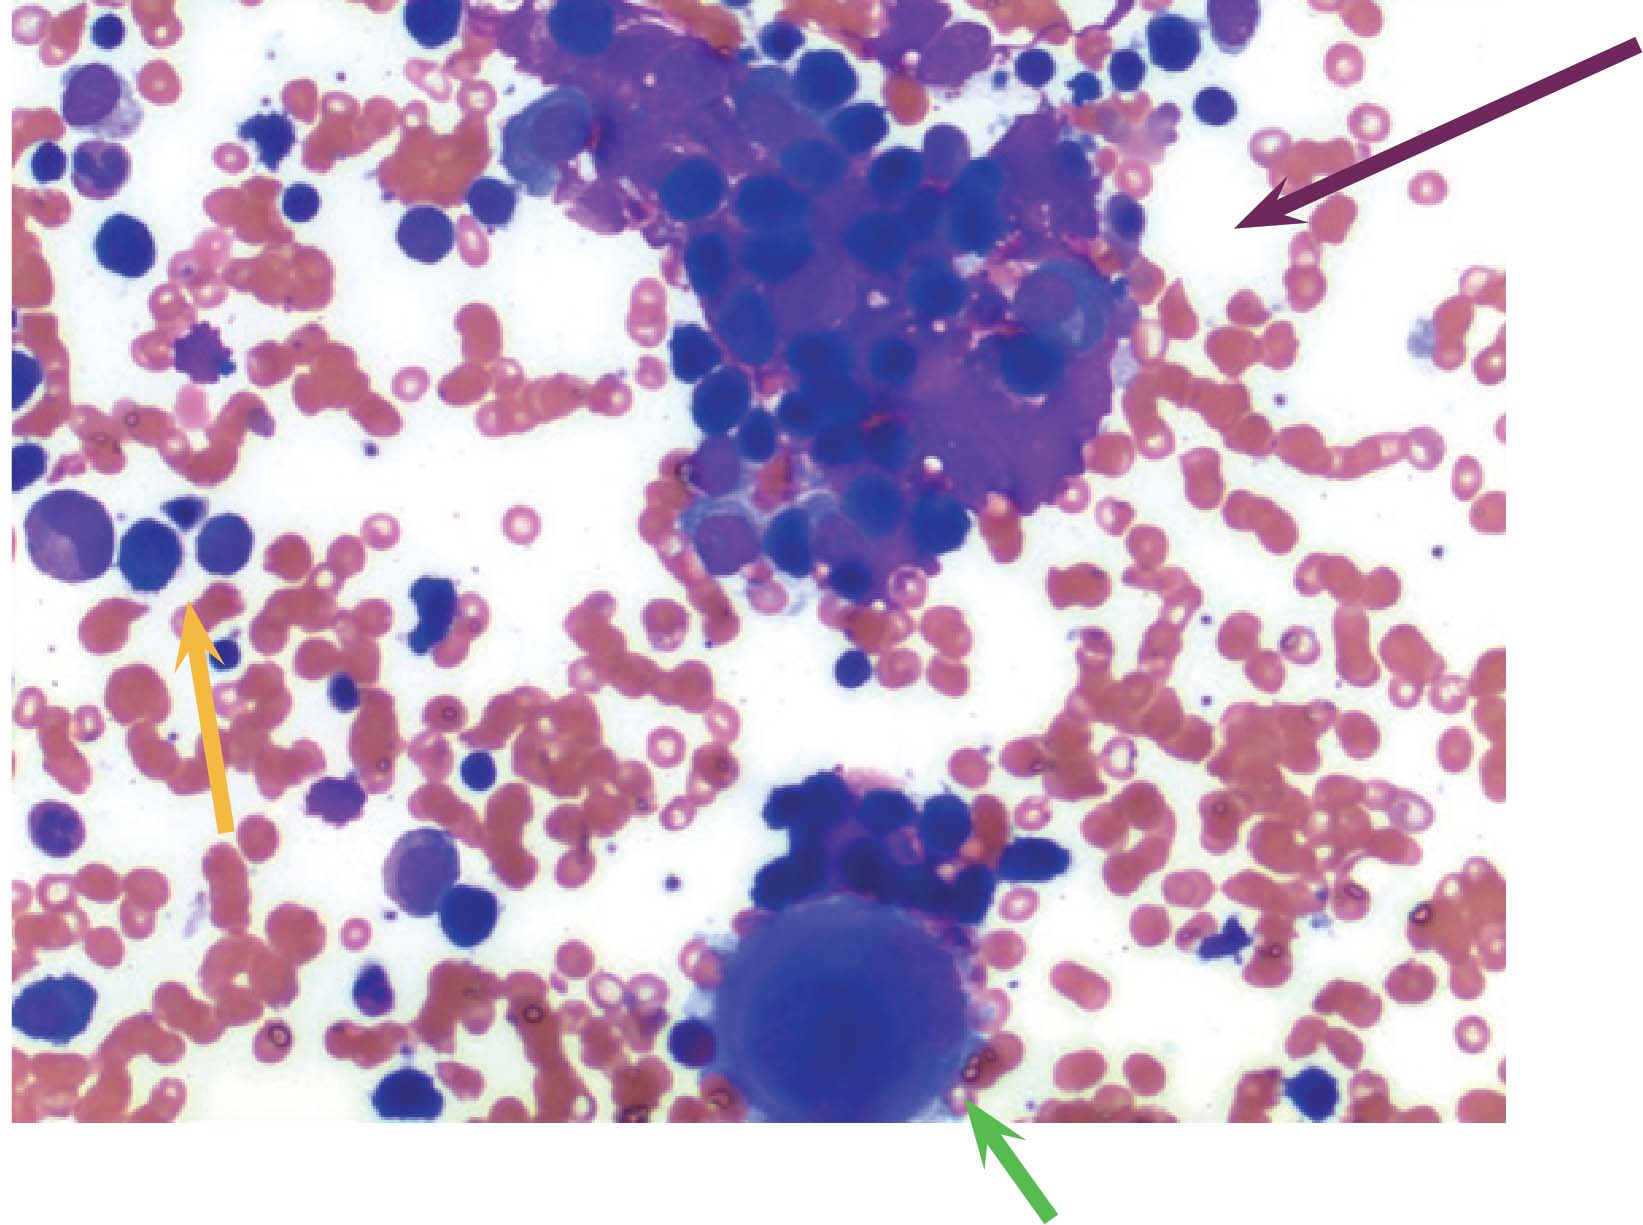 H&E stain of bone marrow aspirate showing mainly small lymphocytes (orange arrow) and clumps of possible plasma cells (purple arrow). Cell at bottom center is a megakaryocyte (green arrow).